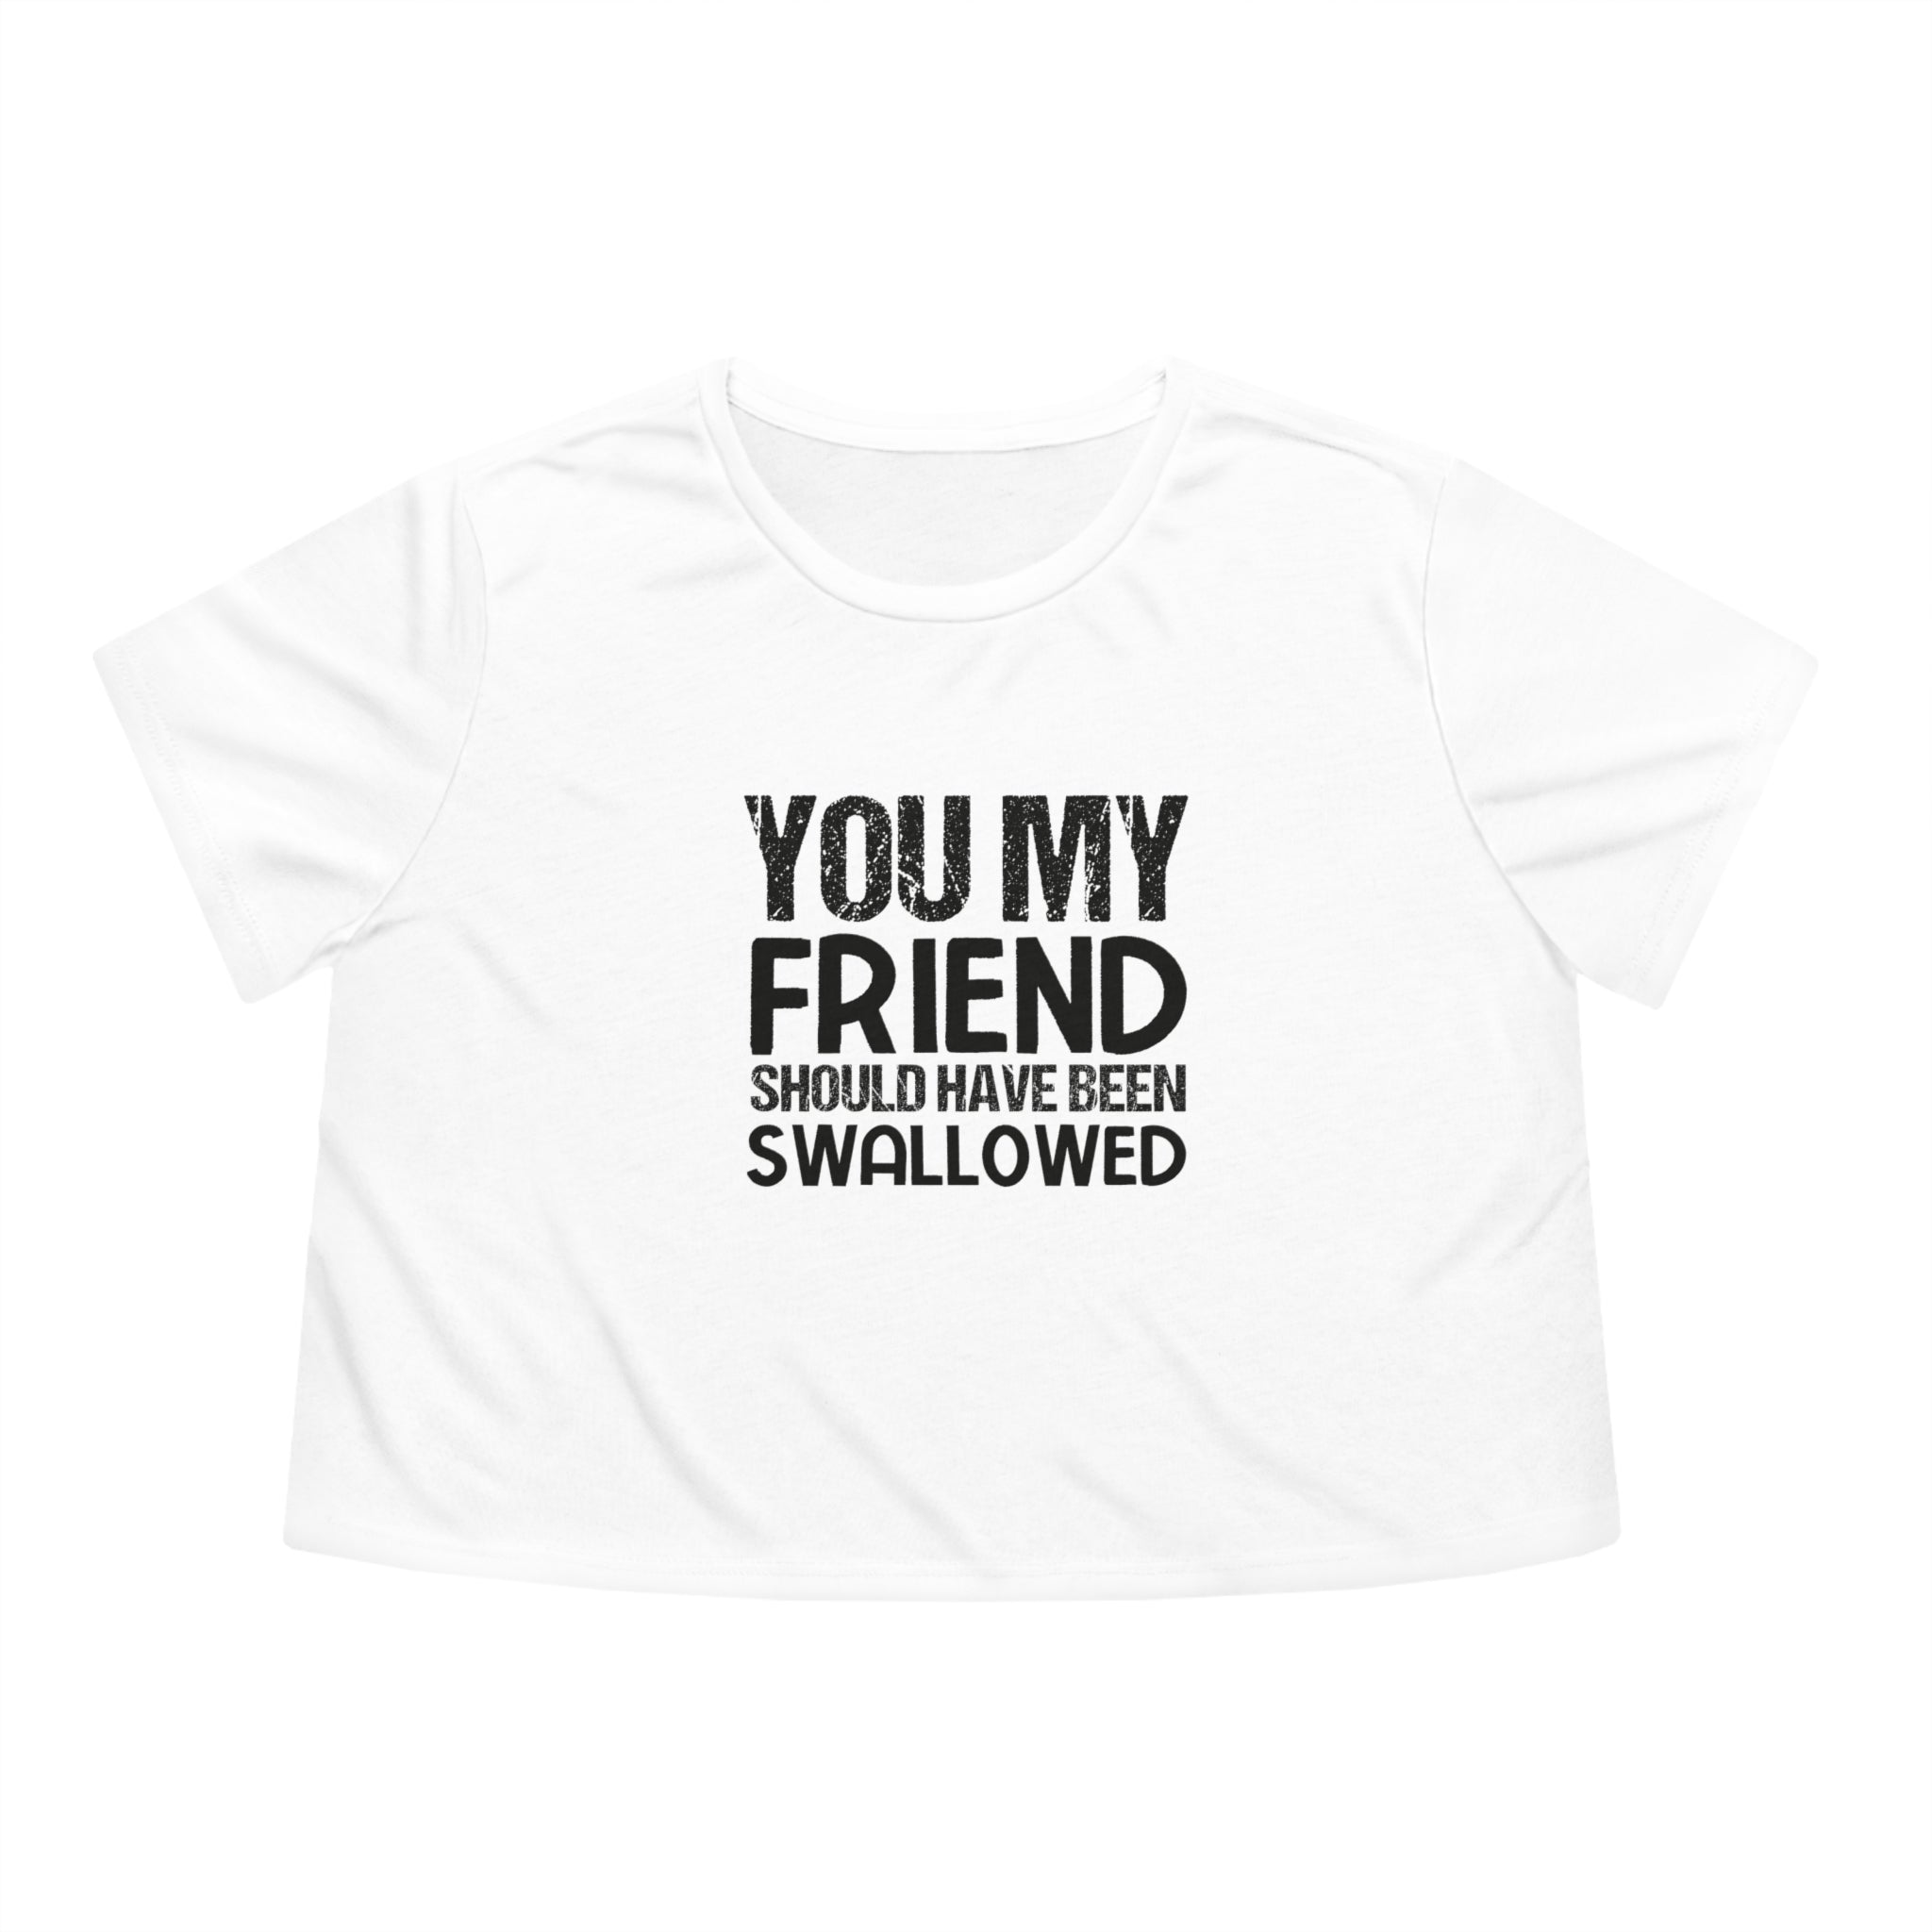 "You, My Friend, Should Have Been Swallowed" Hilarious Women's Flowy Cropped Tee - Edgy Humor, Cheeky Statement, Fashionable Crop Top Style